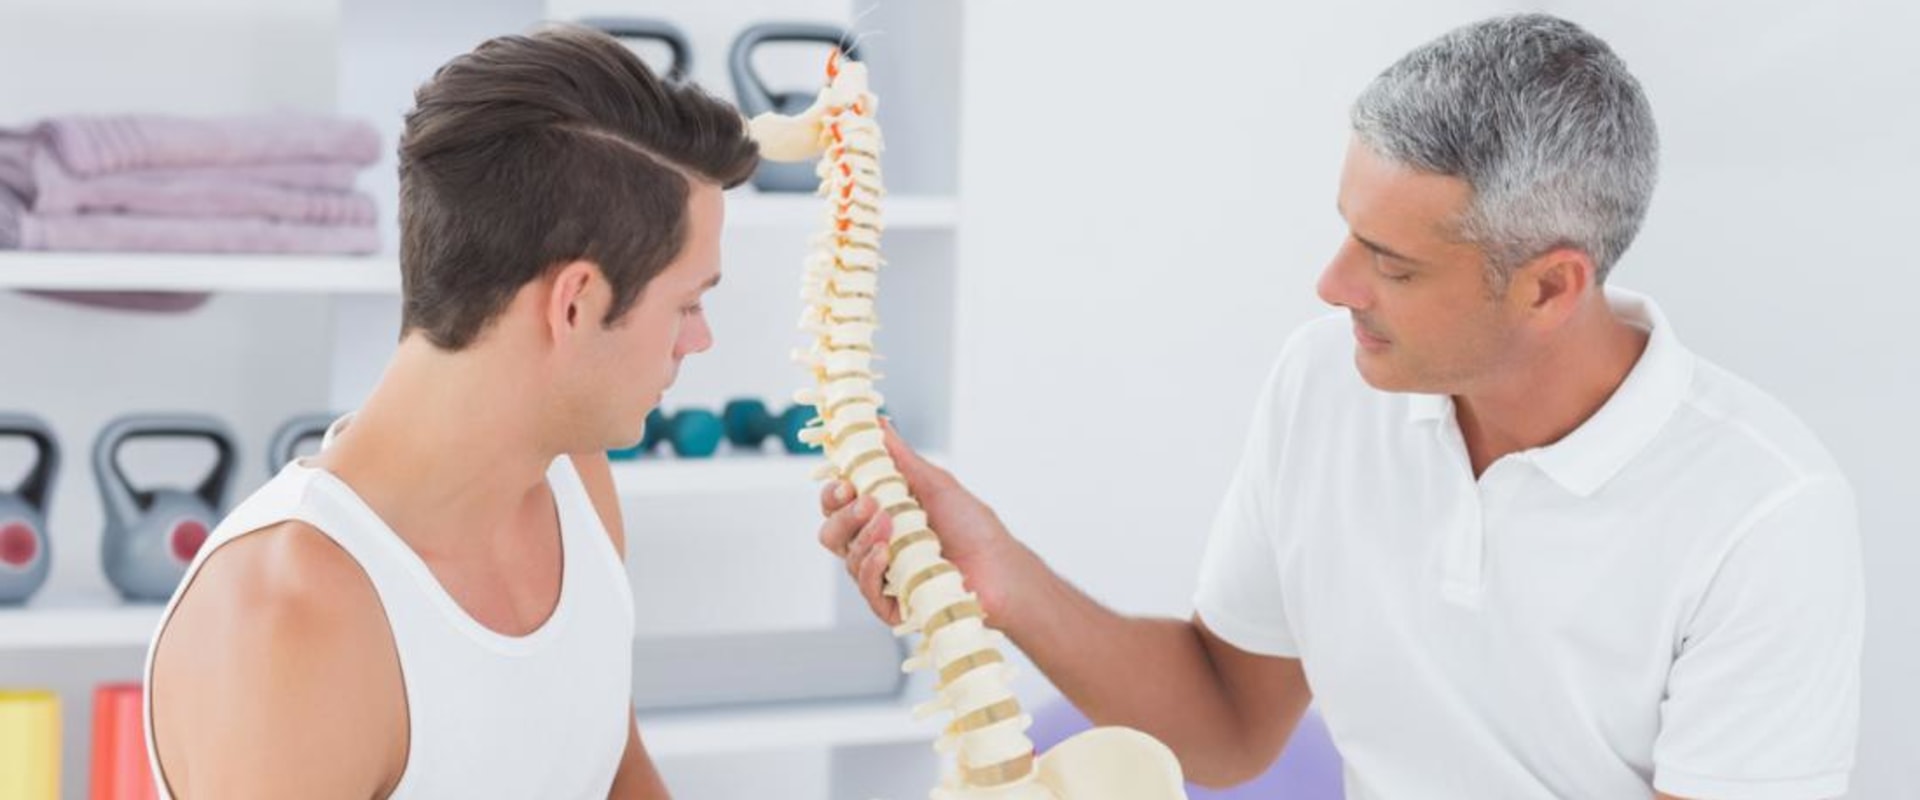 Is osteopathy recognised?